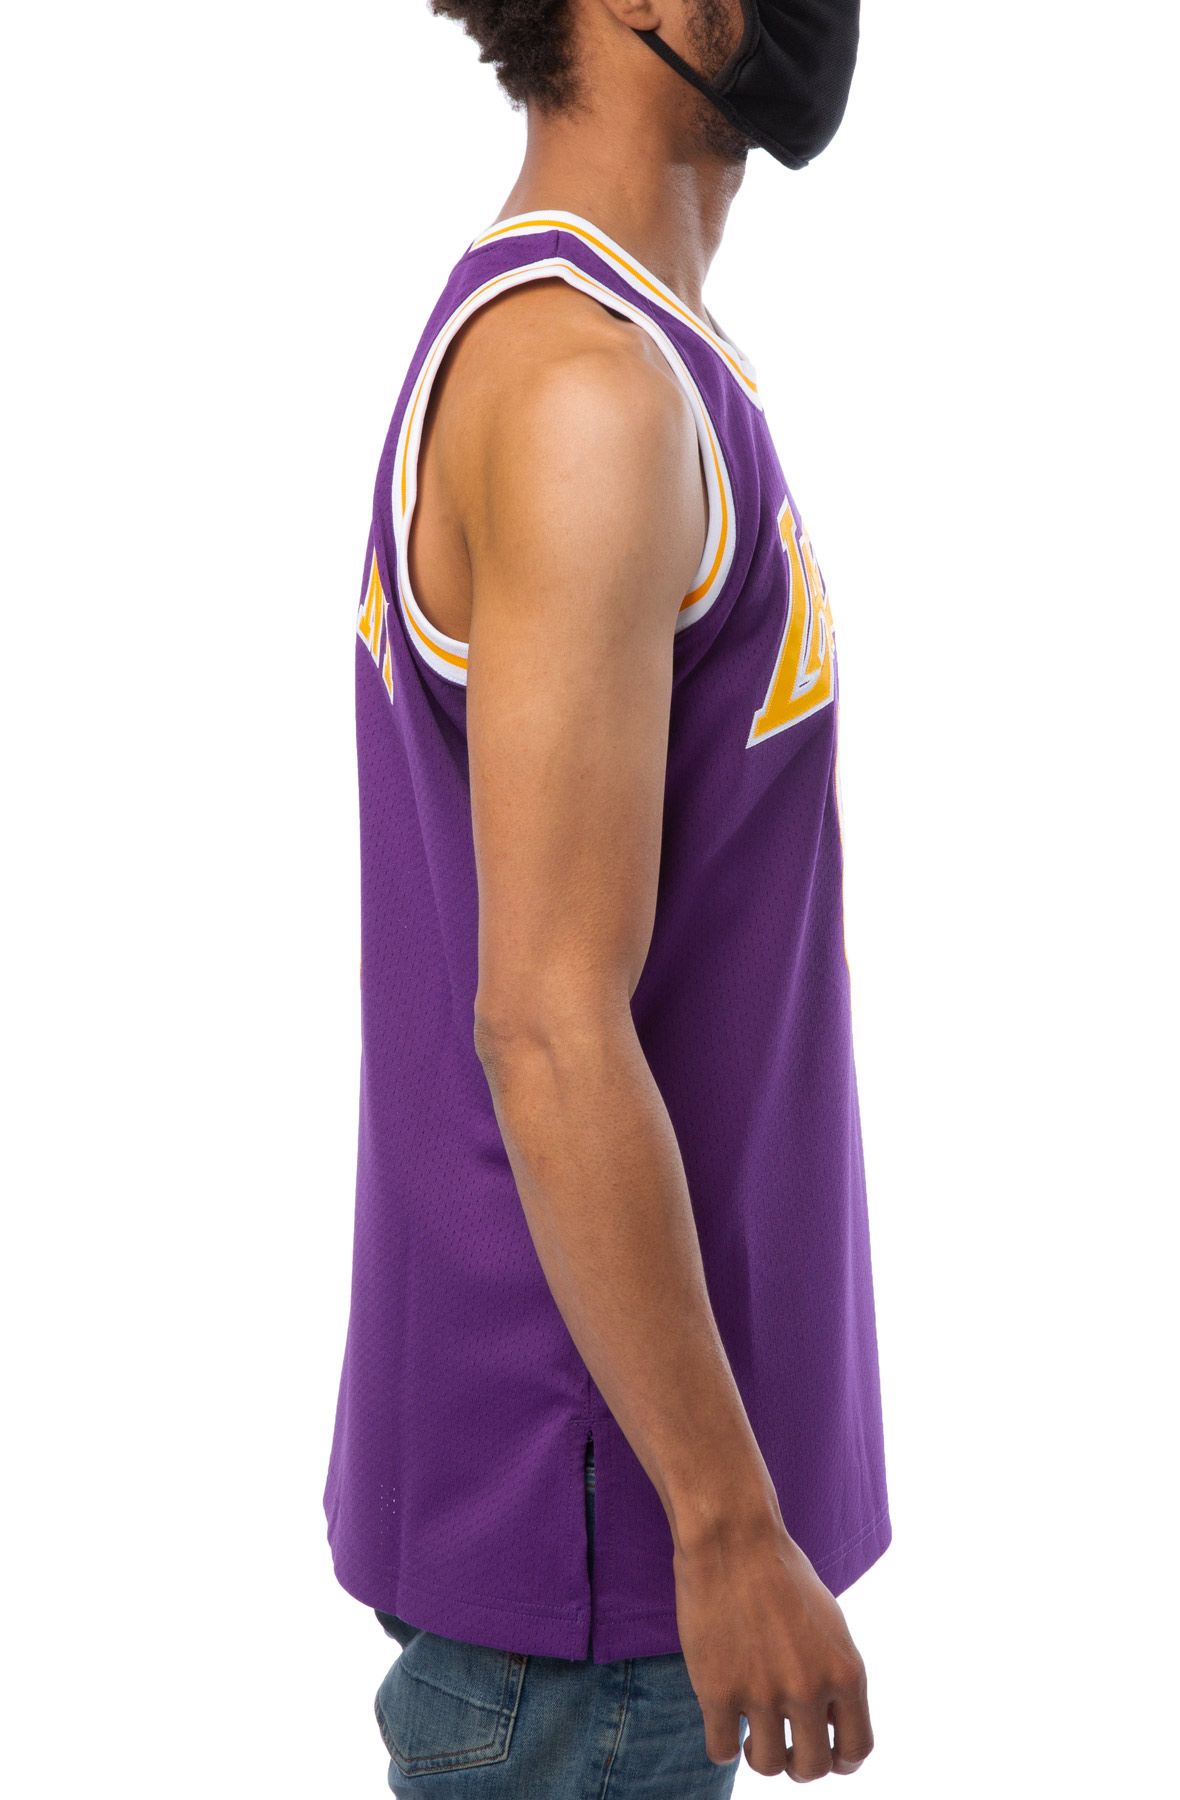 Mitchell And Ness Men NBA Los Angeles Lakers Road 1996-97 Kobe